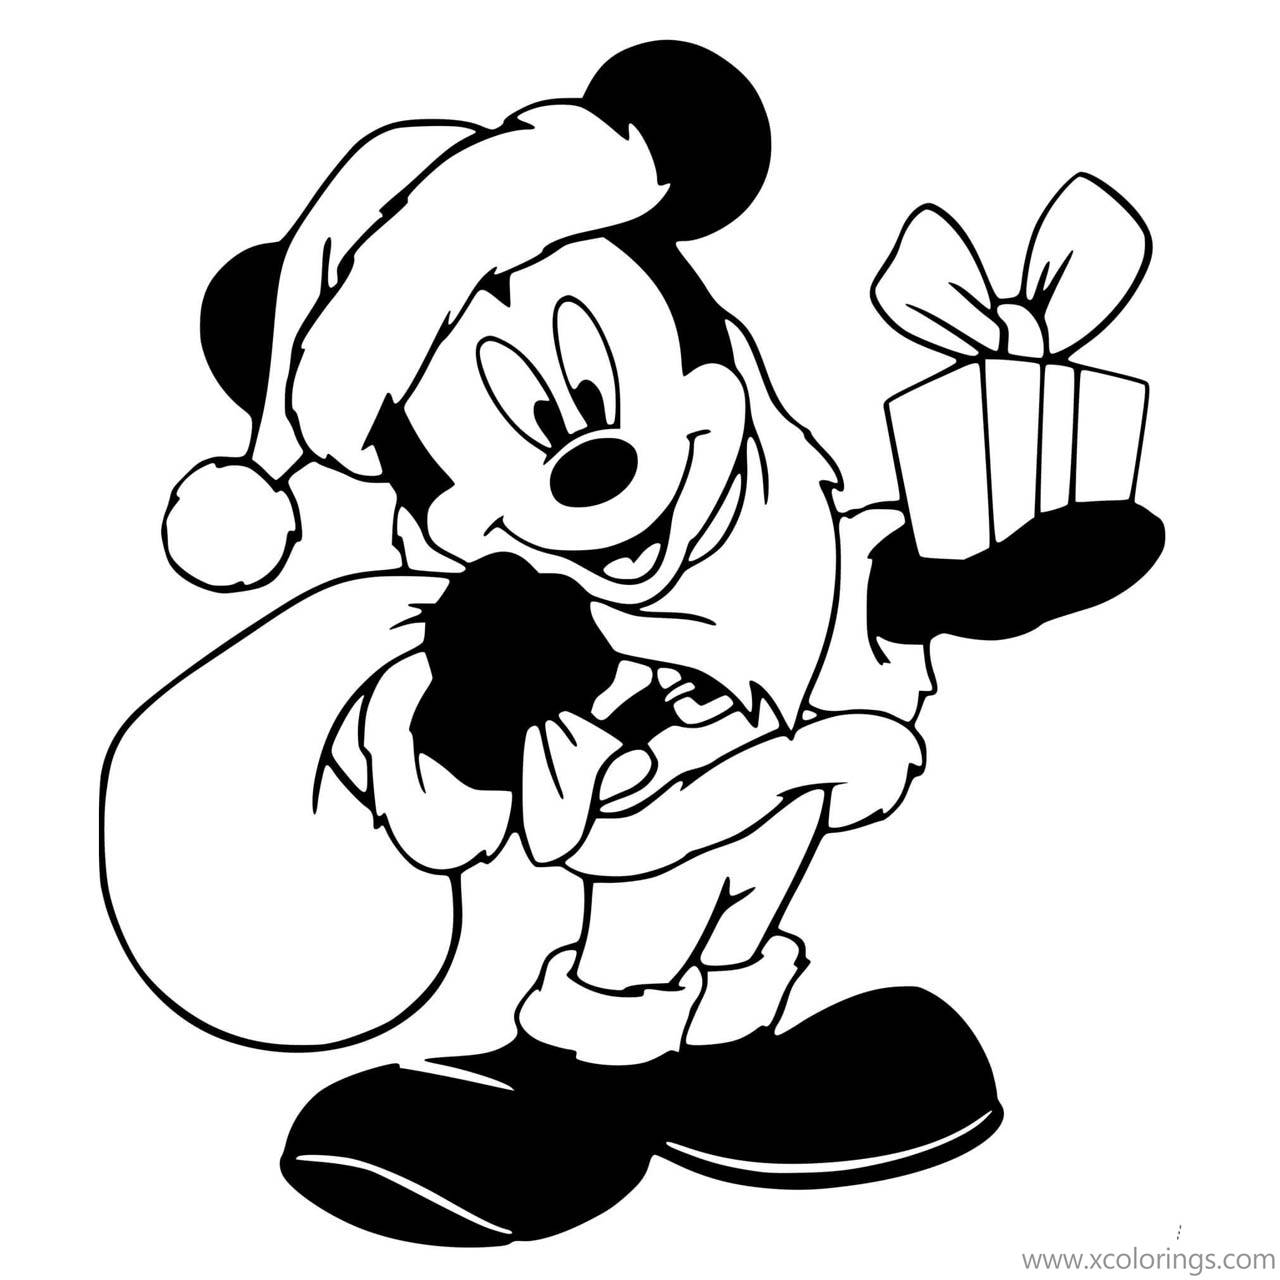 Free Mickey Mouse Christmas Santa Claus Coloring Pages printable